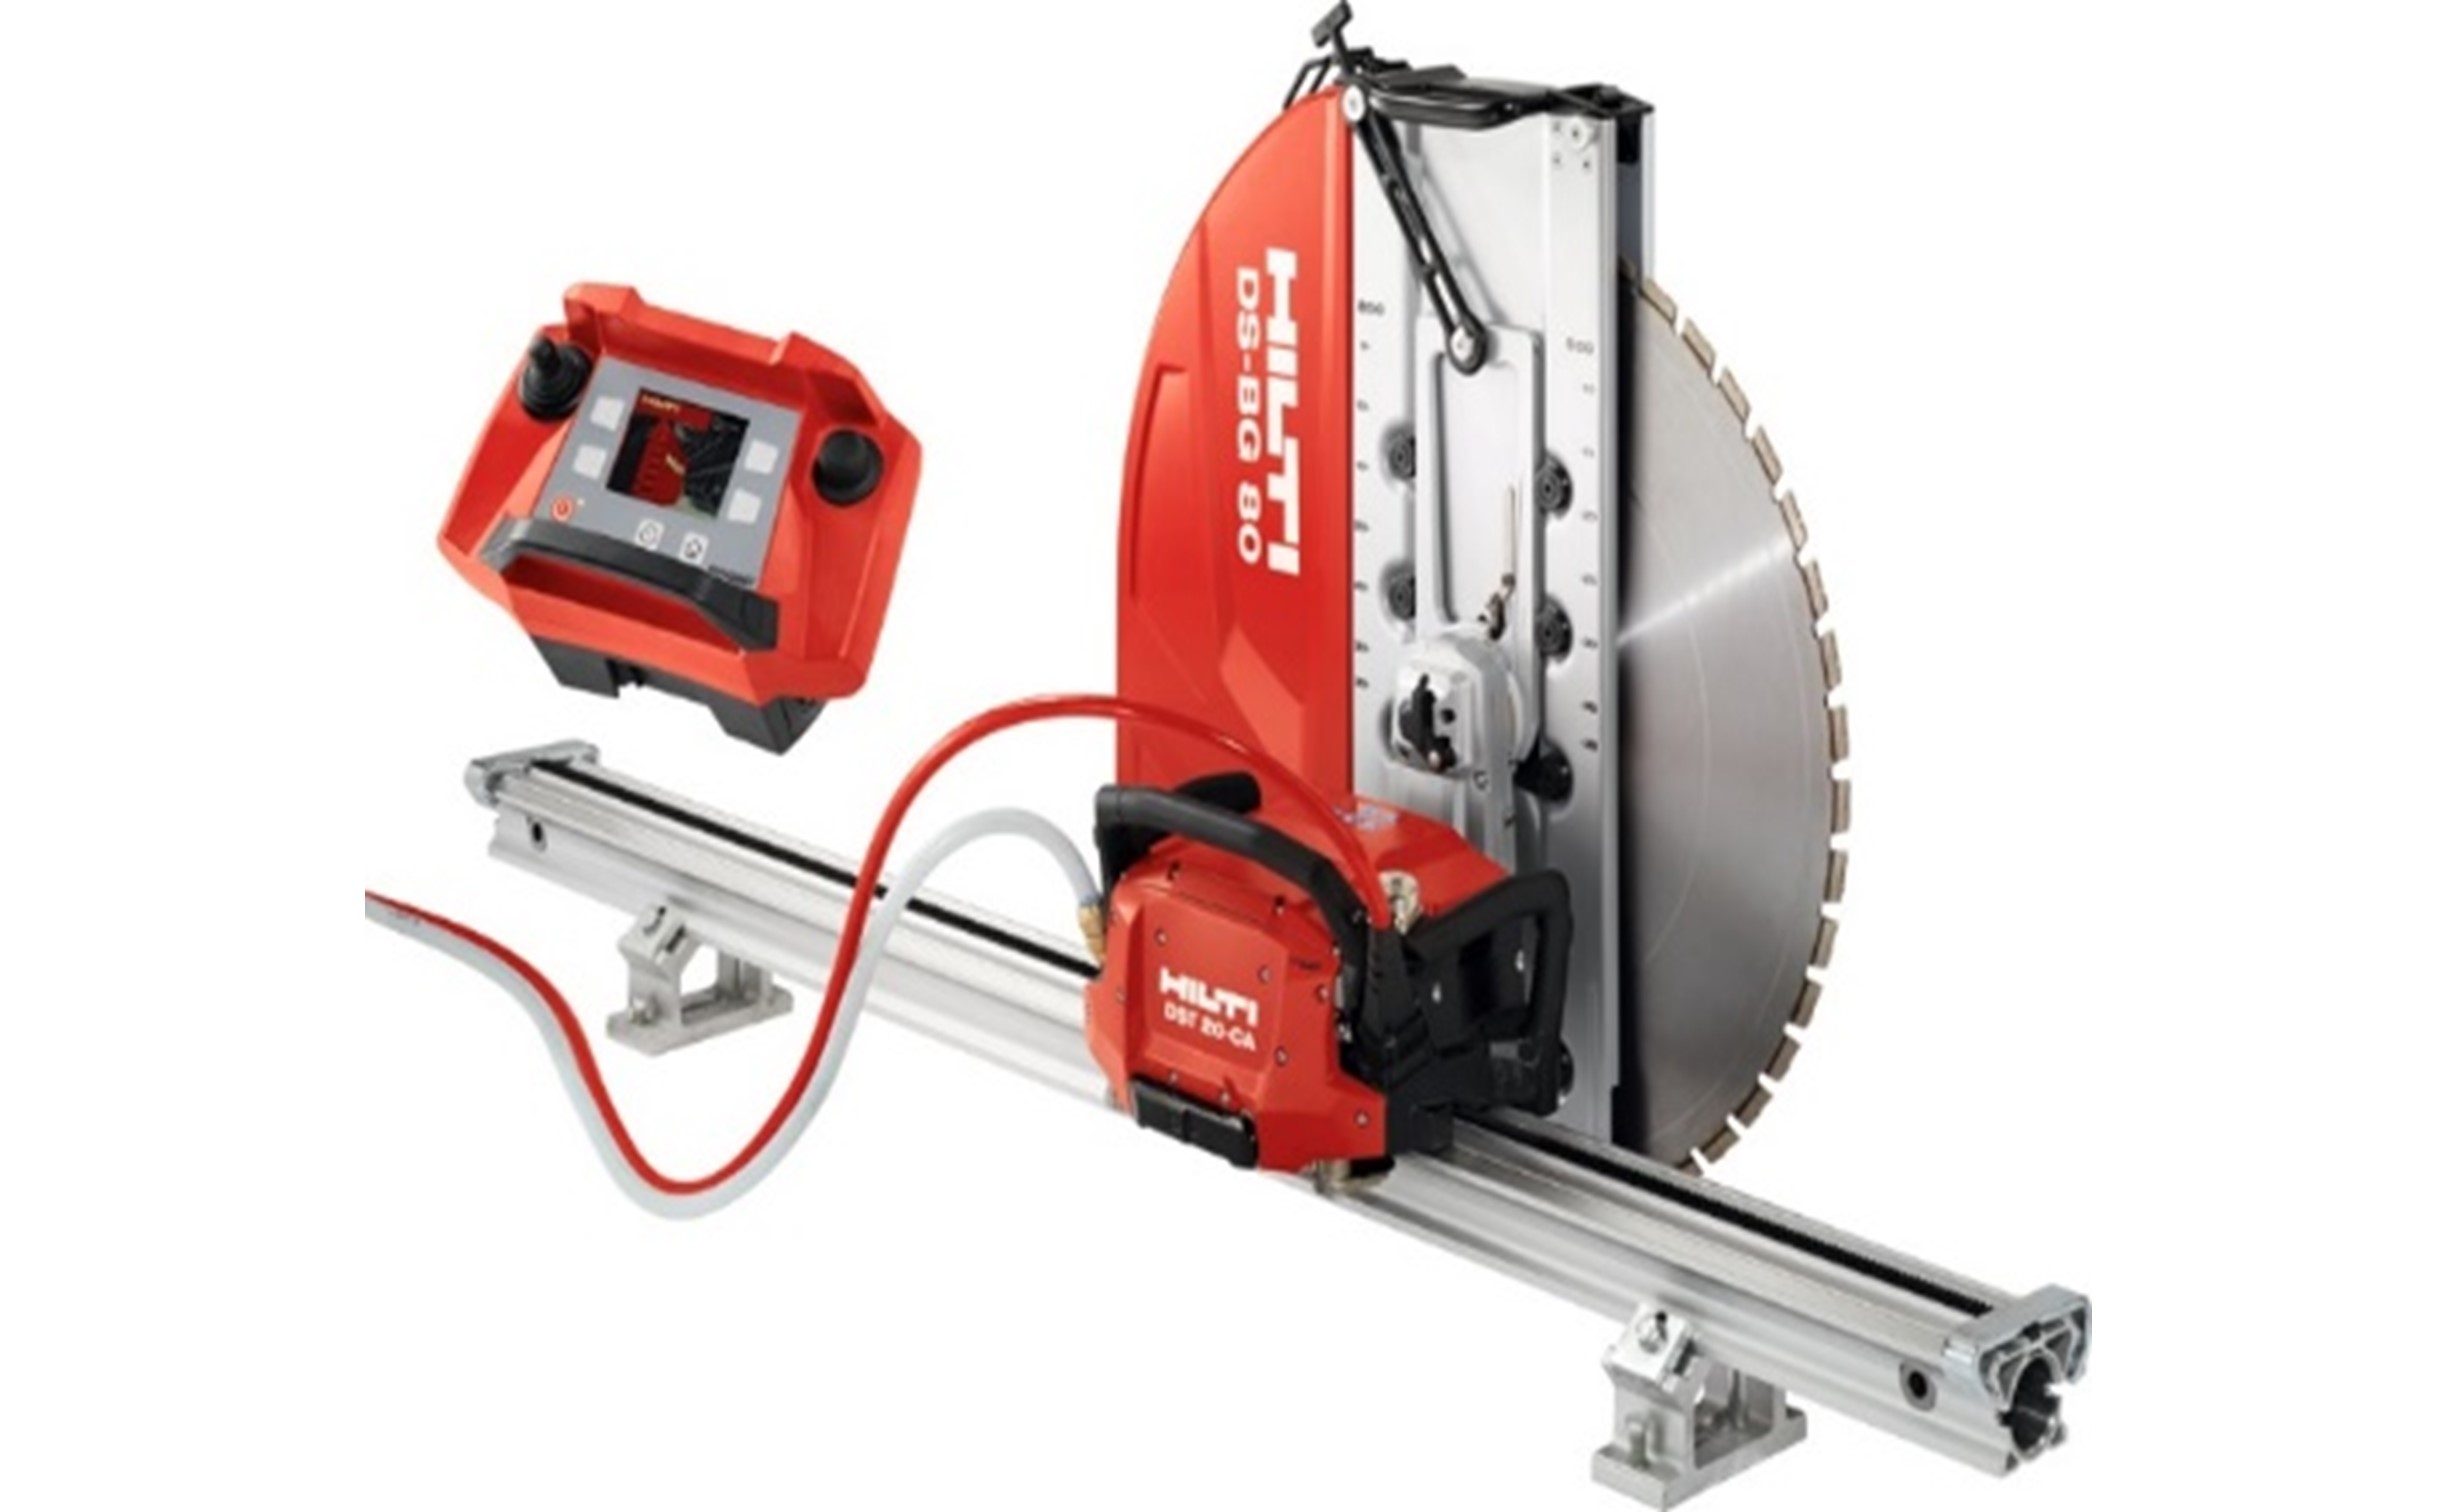 DST 20-CA Wall Saw